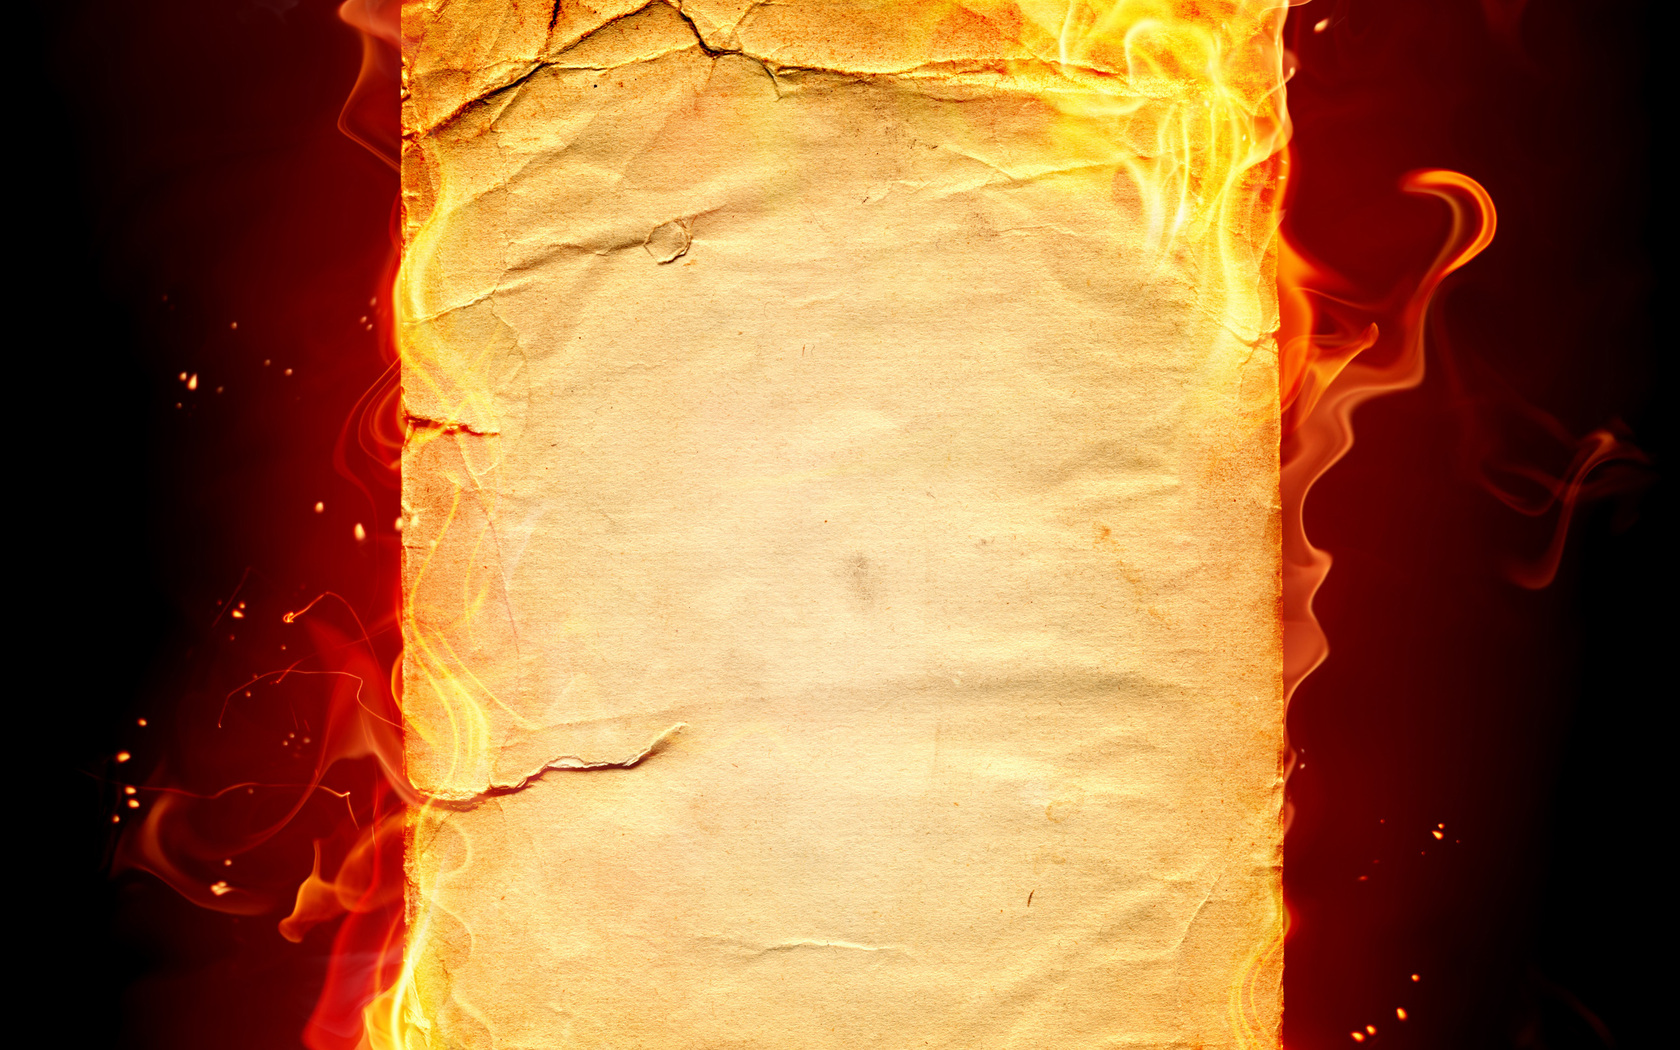 Artistic Fire HD Wallpaper | Background Image